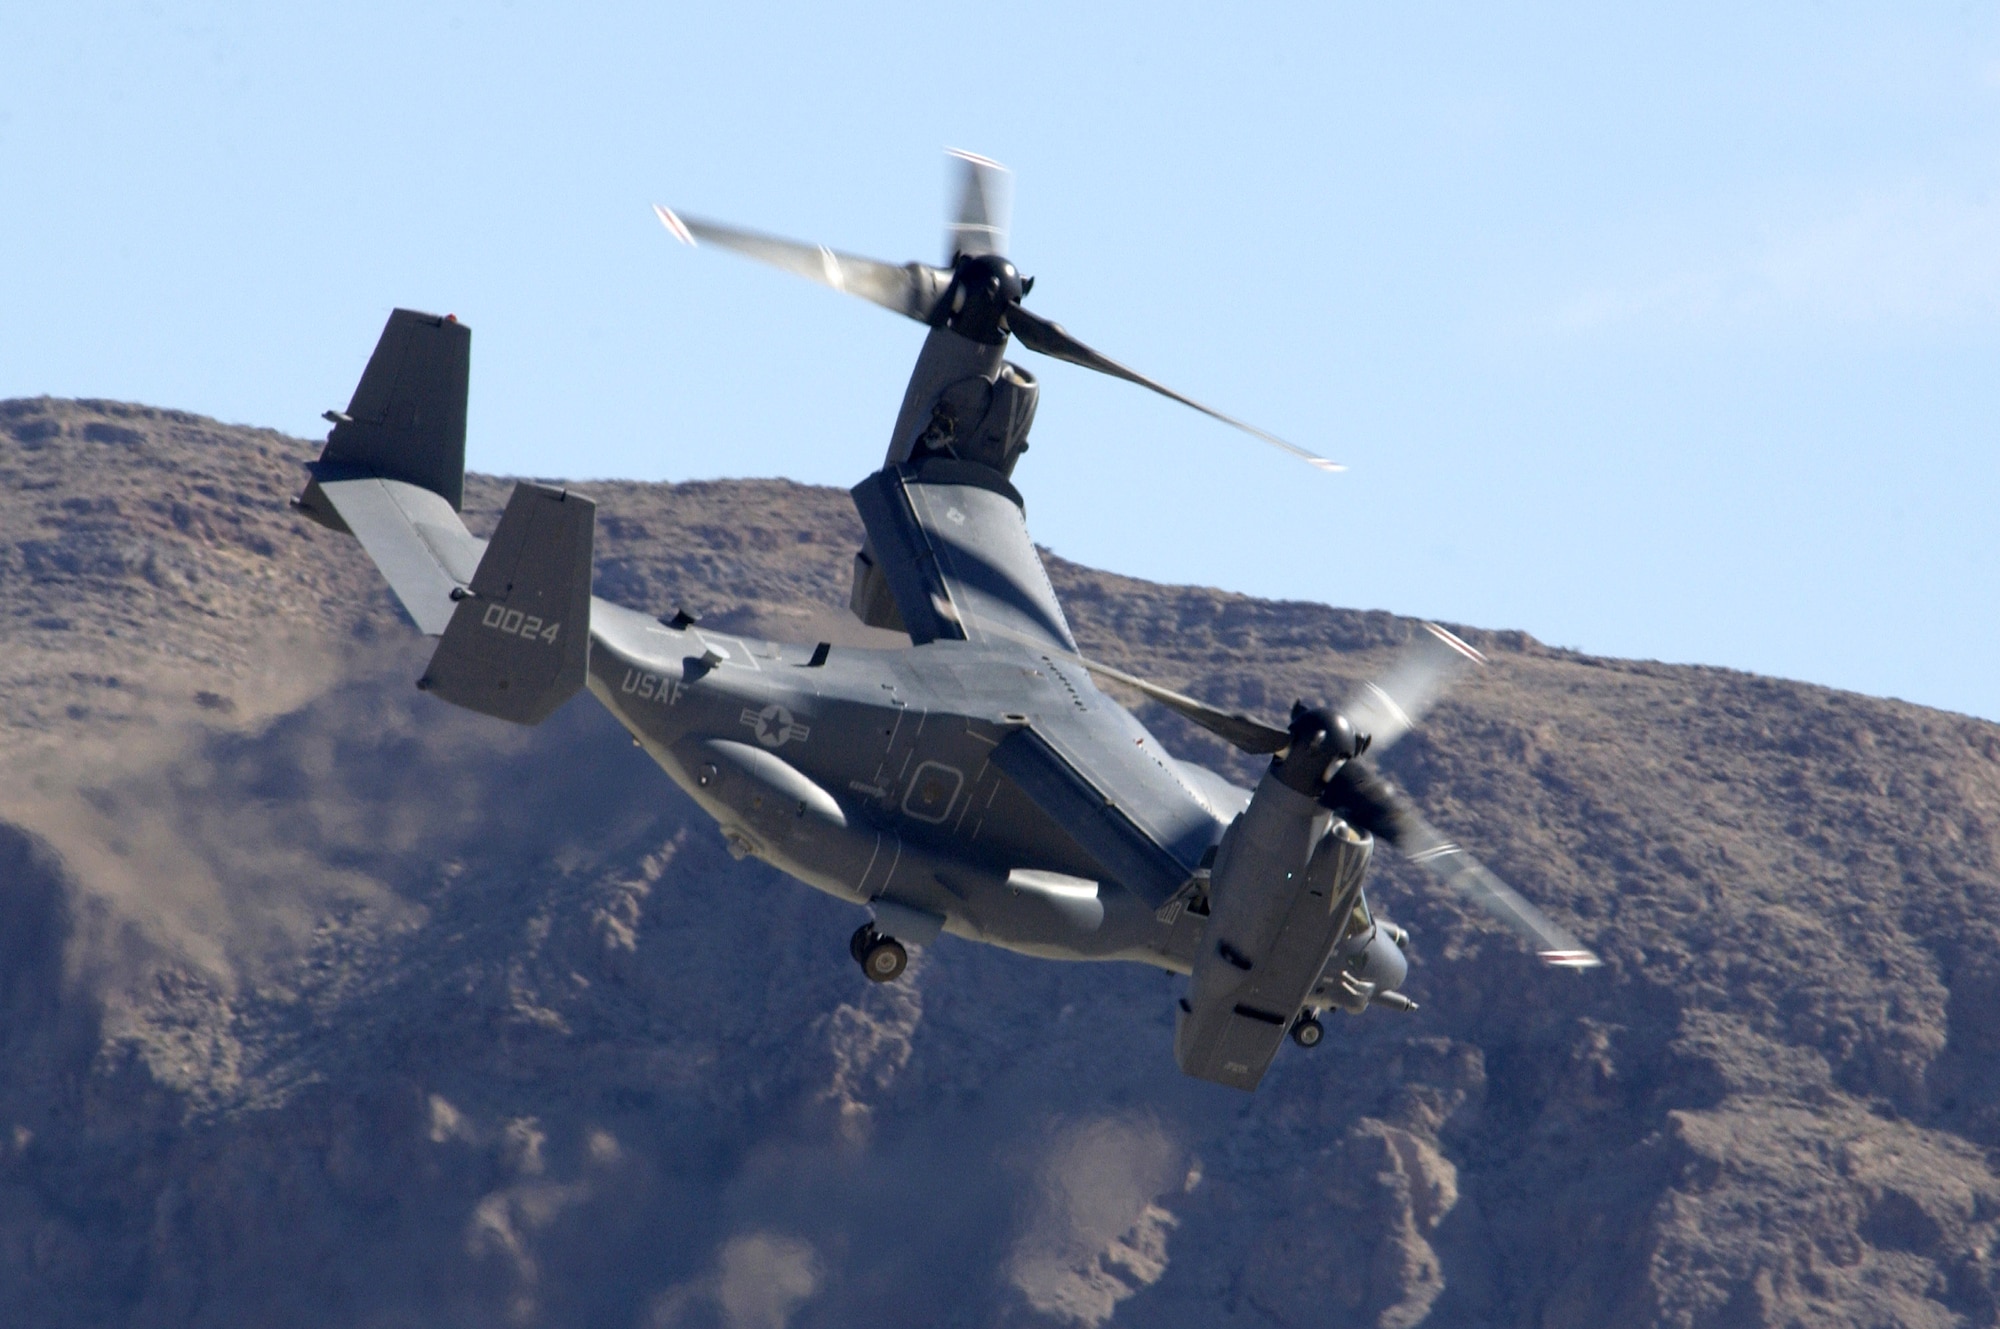 A CV-22 Osprey performs a fly-over during Aviation Nation 2006 Nov. 12 at Nellis Air Force Base, Nev. Aviation Nation has been called one of the most diverse, entertaining and well run air shows in America, and was held Nov. 11 and 12. (U.S. Air Force photo/Master Sgt. Kevin J. Gruenwald)